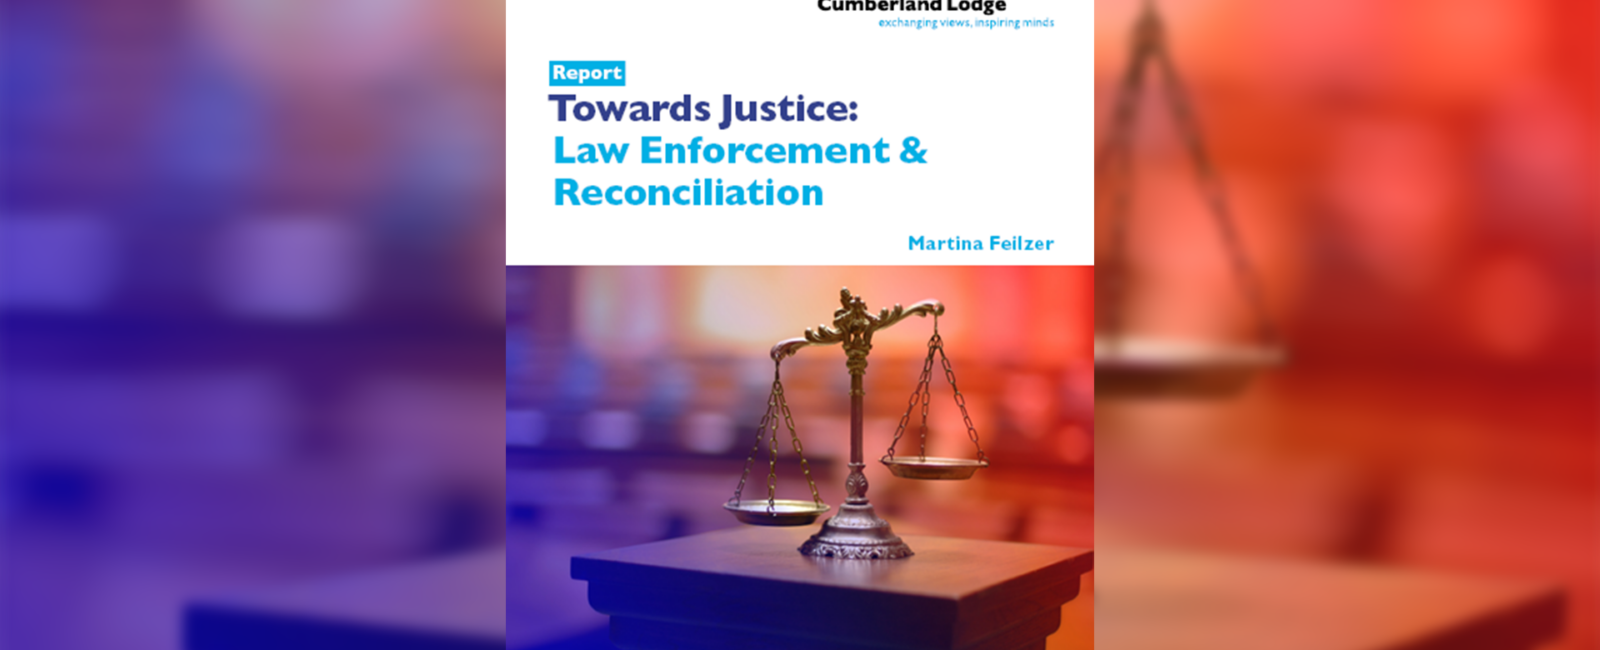 Front cover of Cumberland Lodge report Towards Justice